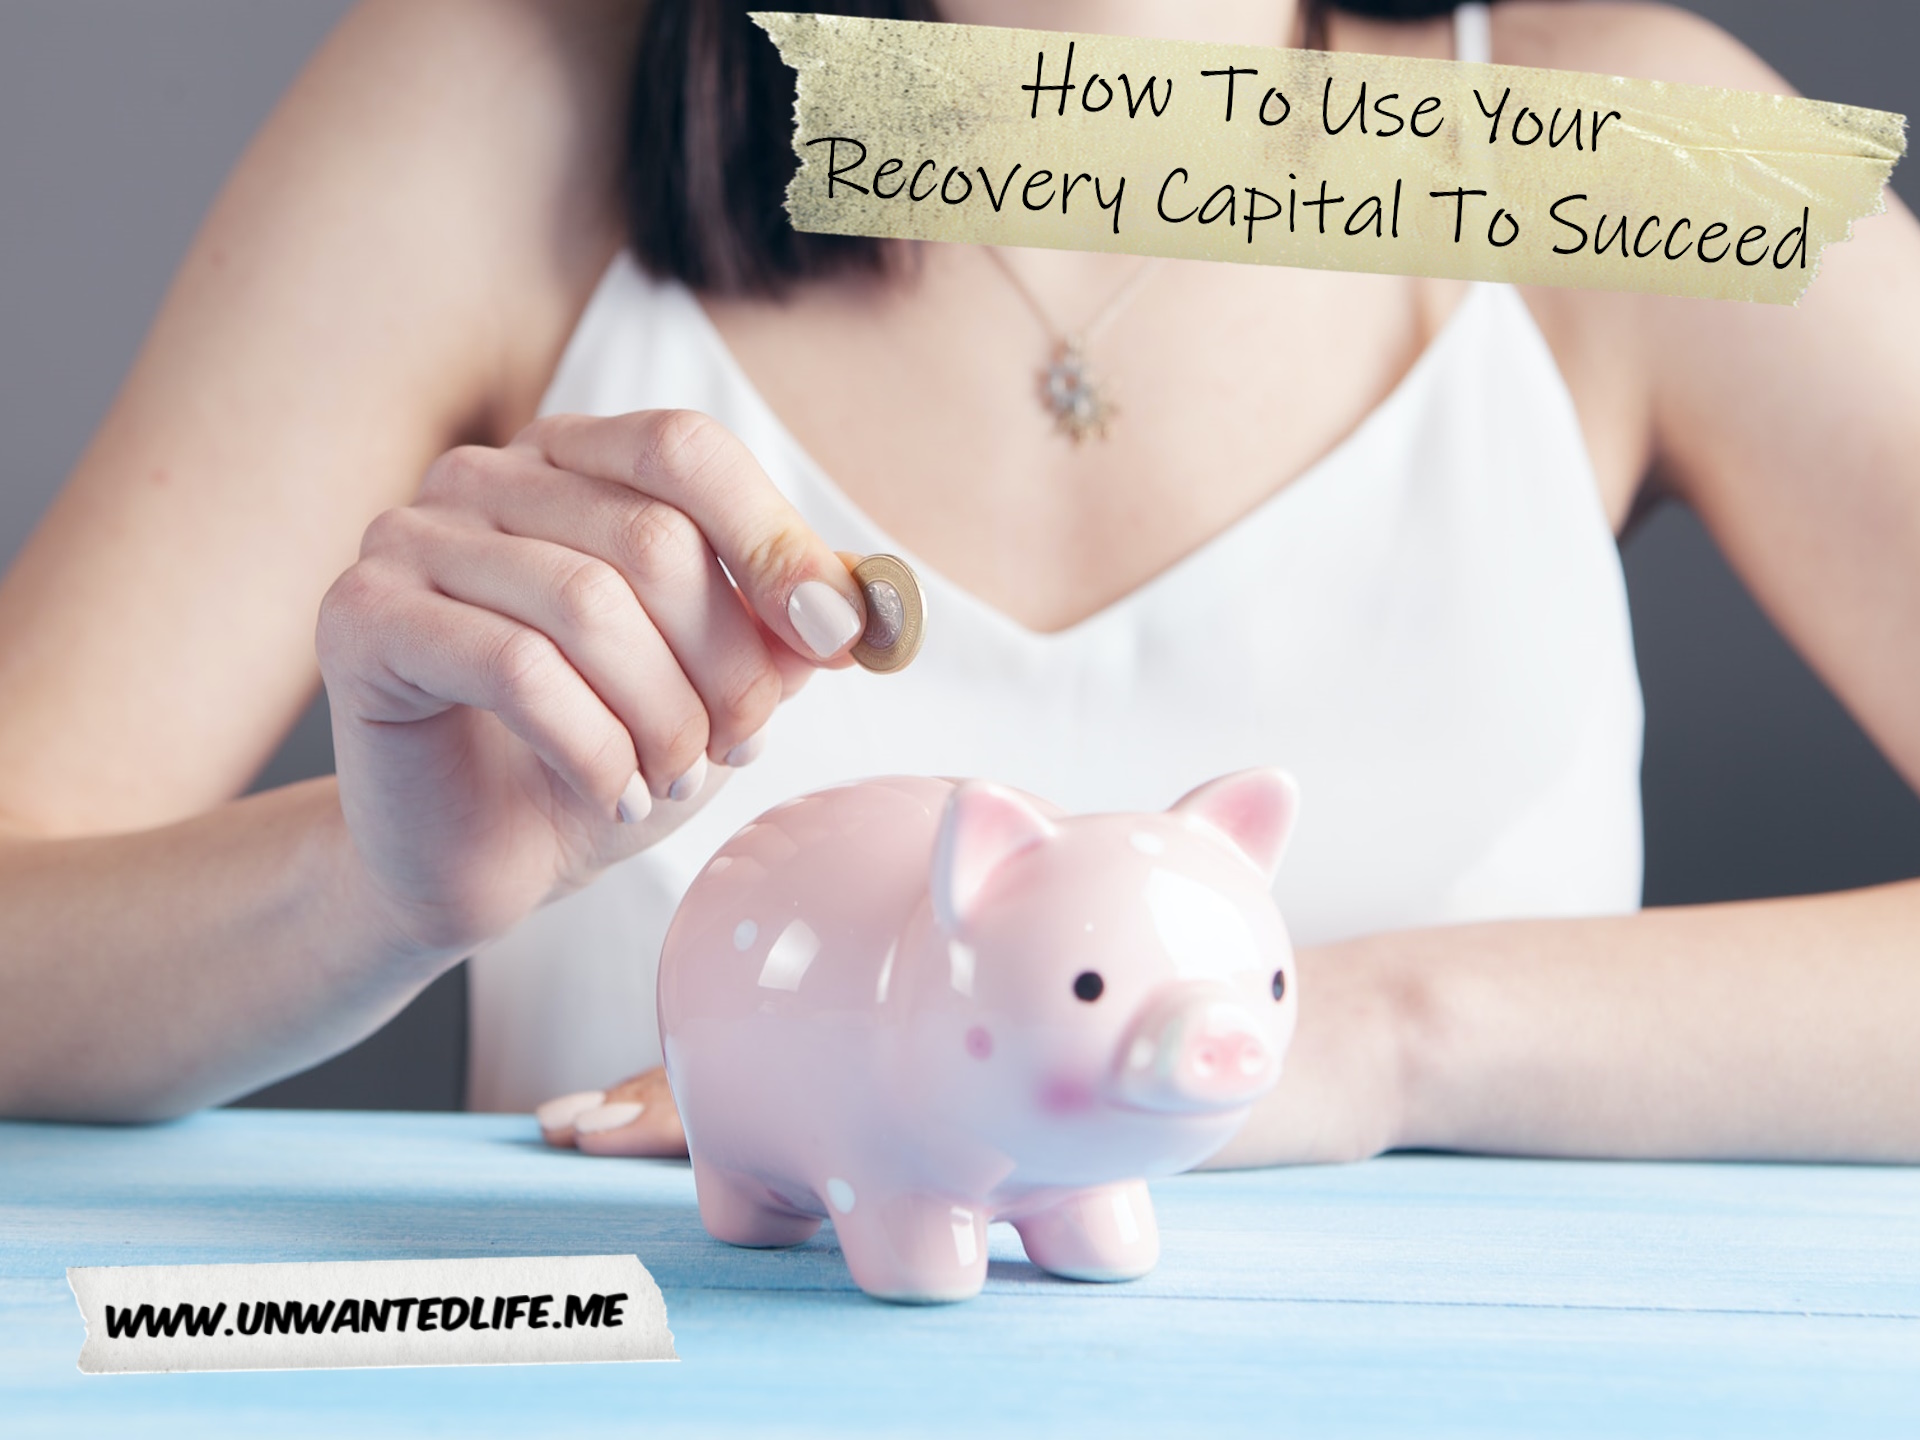 A photo of a woman putting money into a piggy bank to represent the topic of the article - How To Use Your Recovery Capital To Succeed